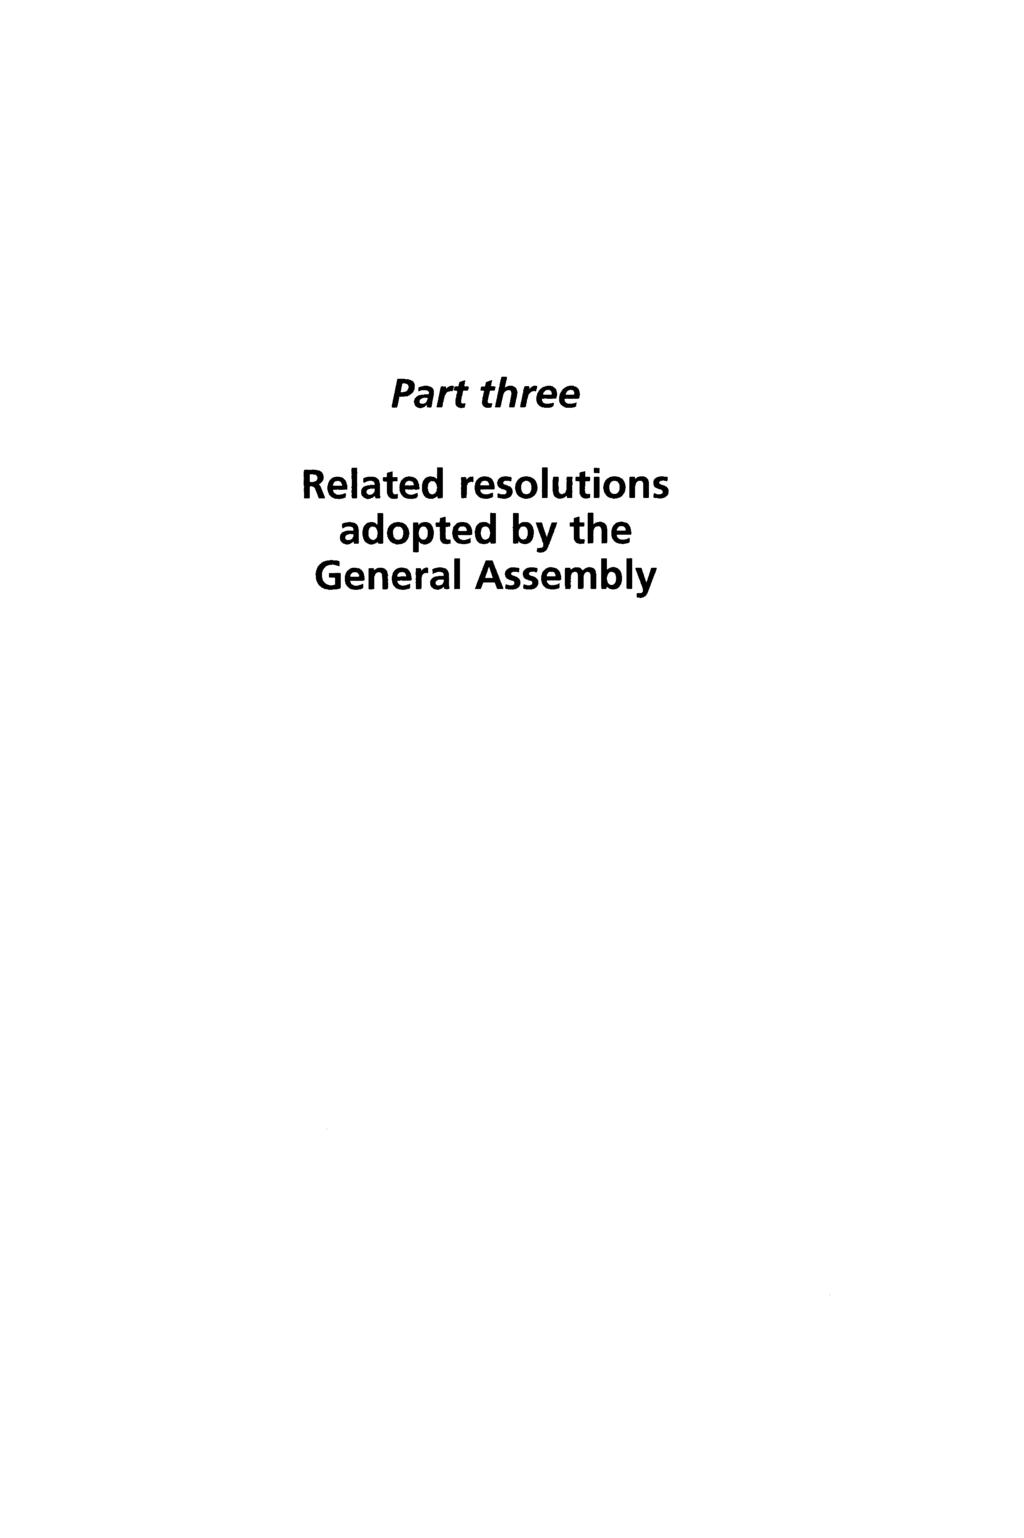 Part three Related resolutions